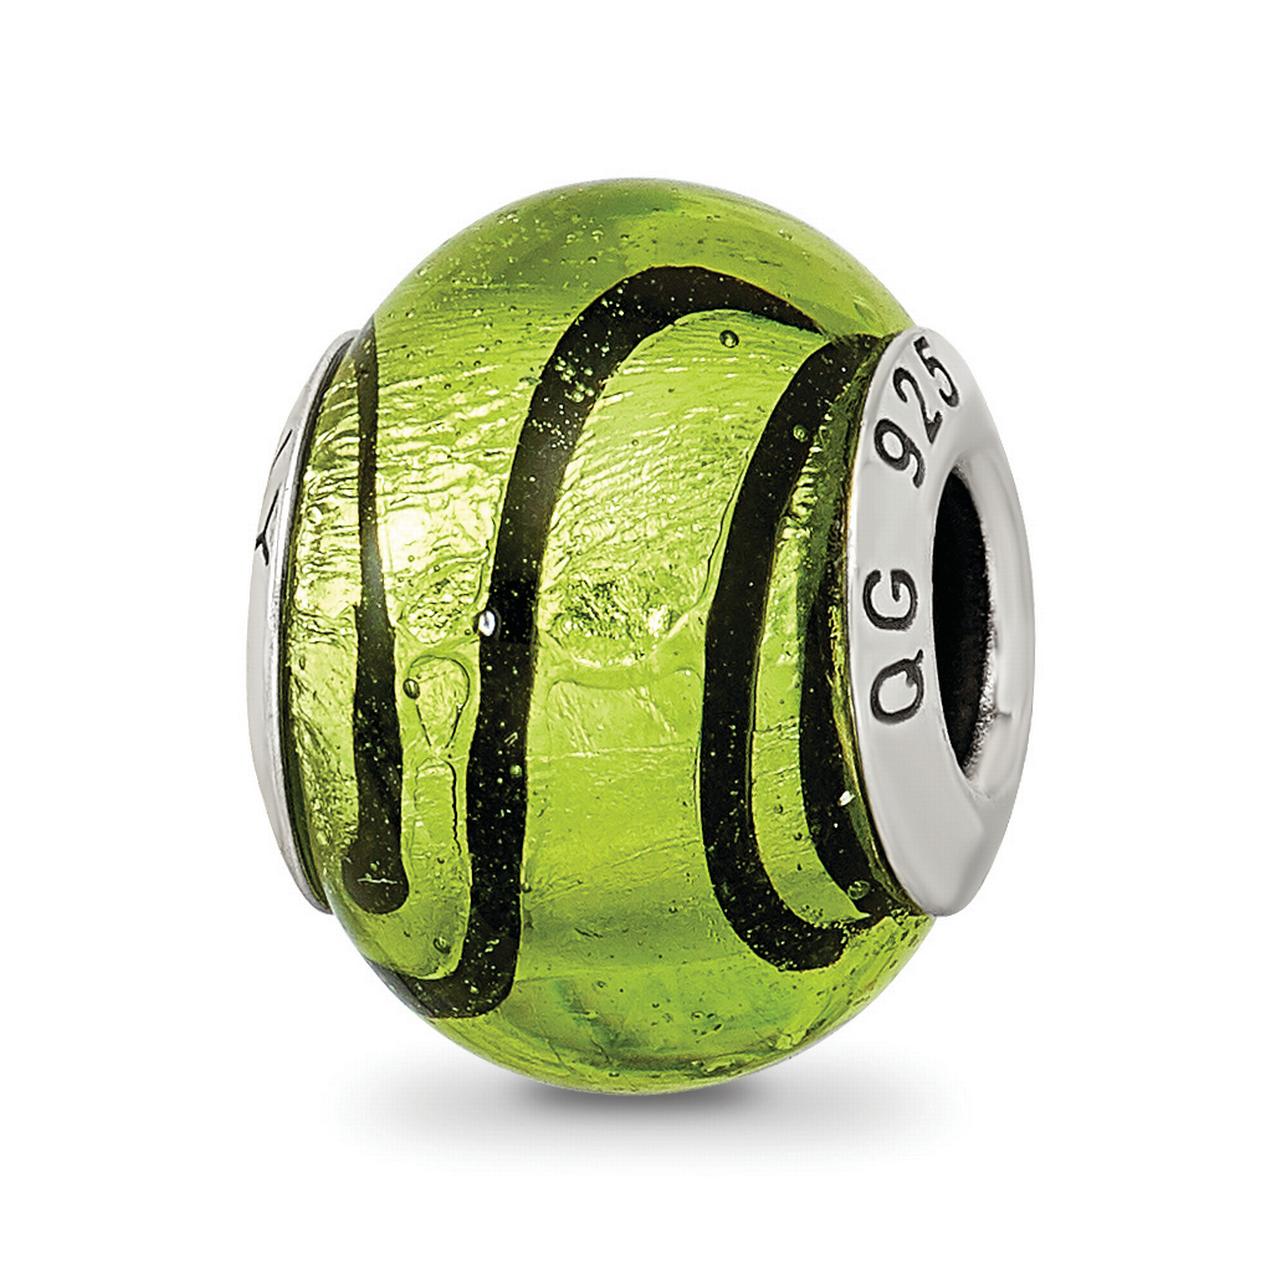 Reflection Beads Sterling Silver Reflections Green/Black Italian Murano Bead - image 1 of 3